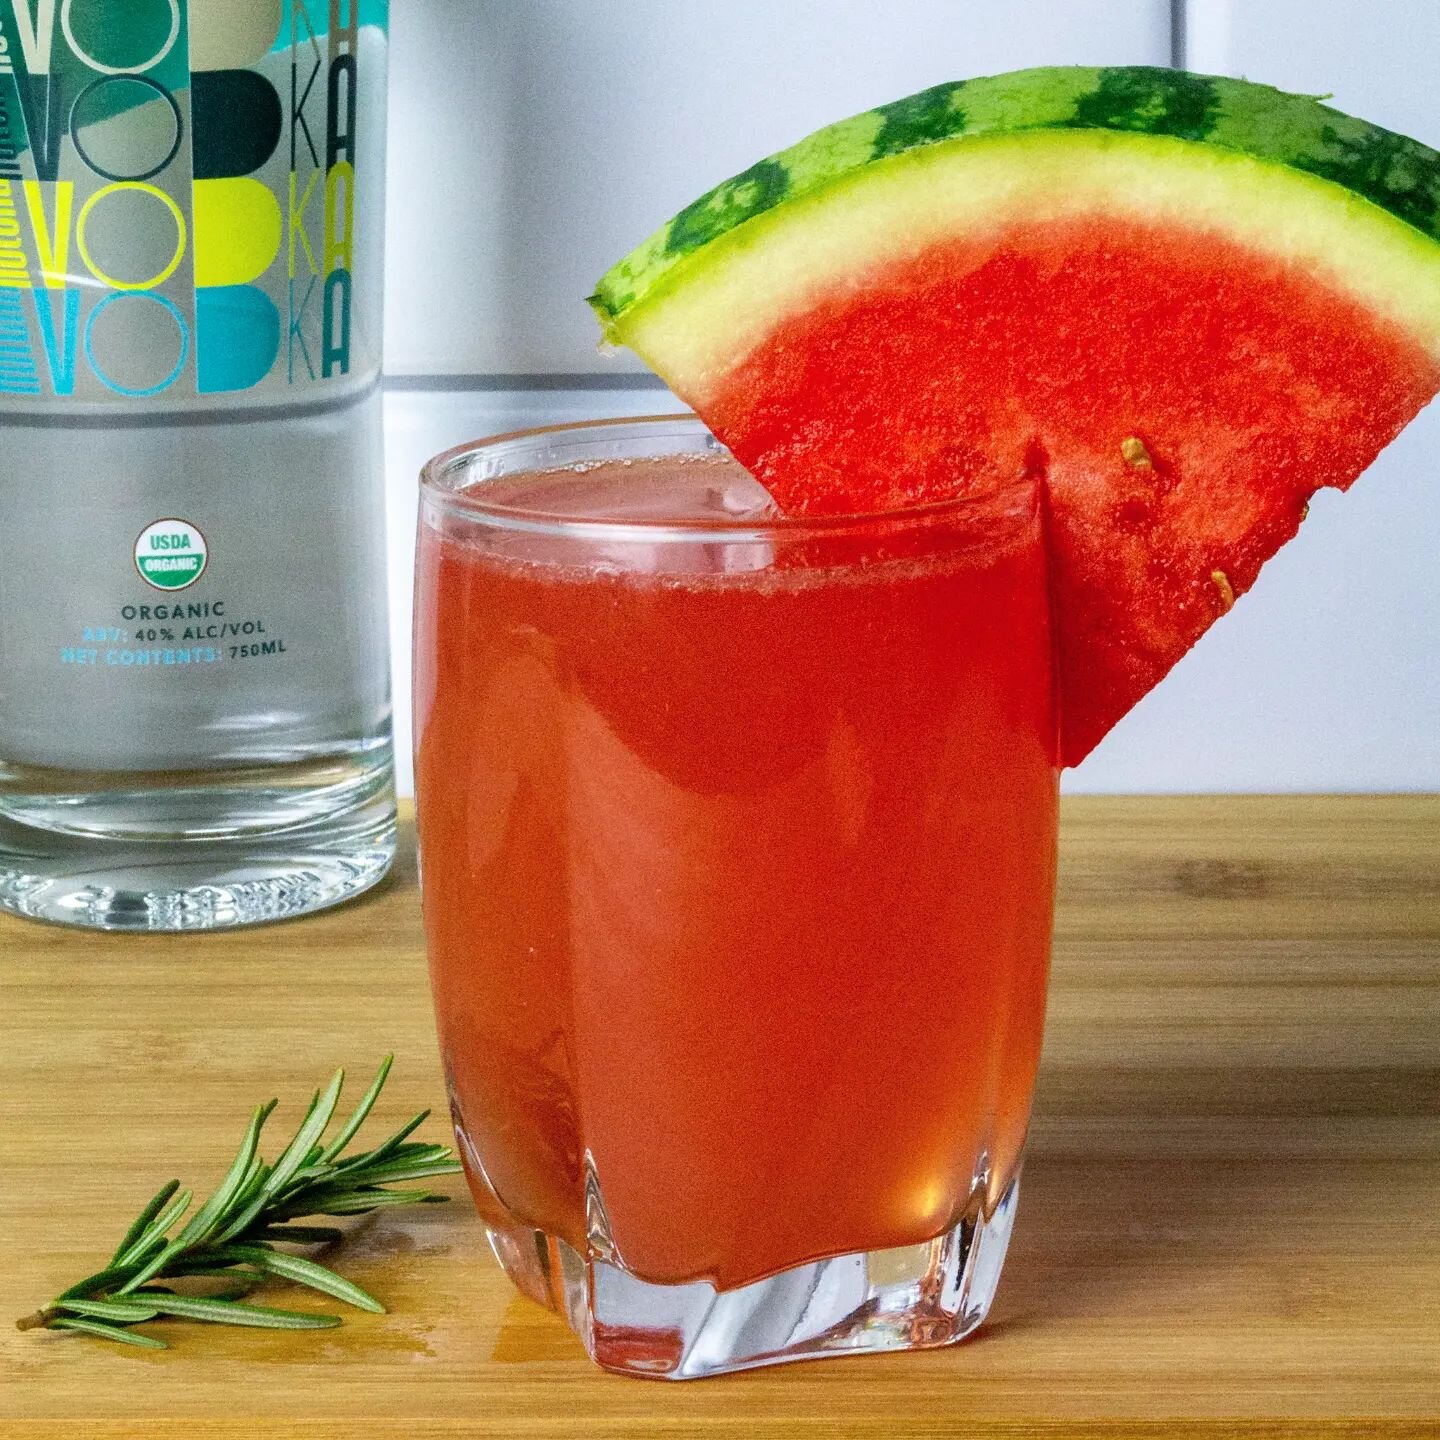 Here is an easy, refreshing cocktail you can make at home that is perfect for this summer heat! And, it is made with only 3 ingredients: Hotcha Vodka, Watermelon, and Club Soda.

Hotcha Watermelon Soda

2 oz Hotcha Vodka
2 oz Organic Watermelon Juice